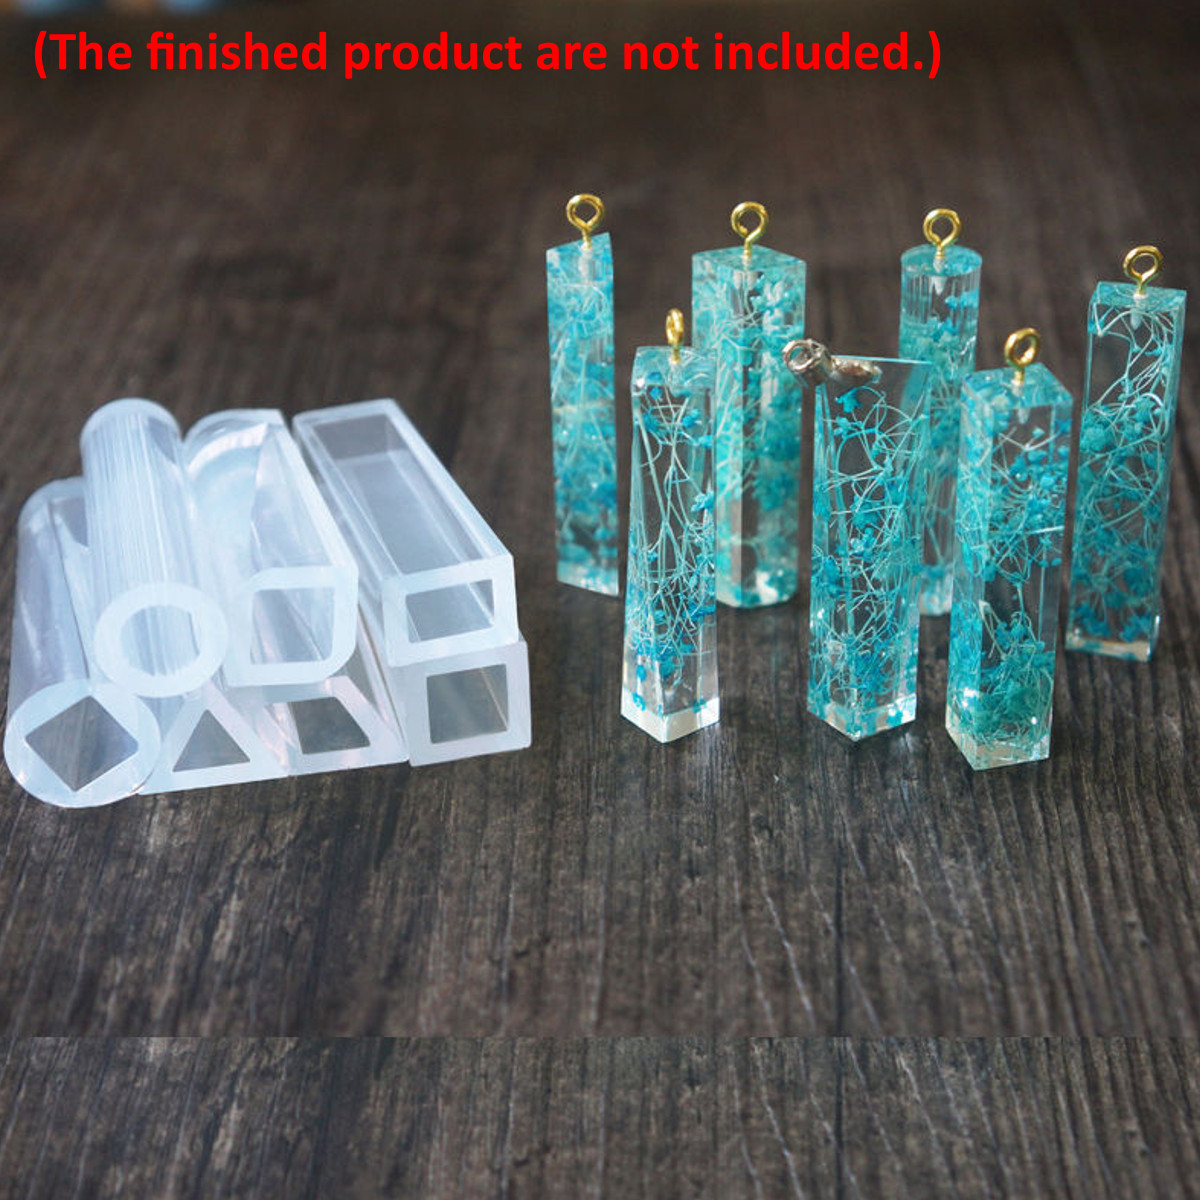 213Pcs-DIY-Epoxy-Resin-Casting-Molds-Kit-Silicone-Jewelry-Pendant-Craft-Making-Mould-1656483-8